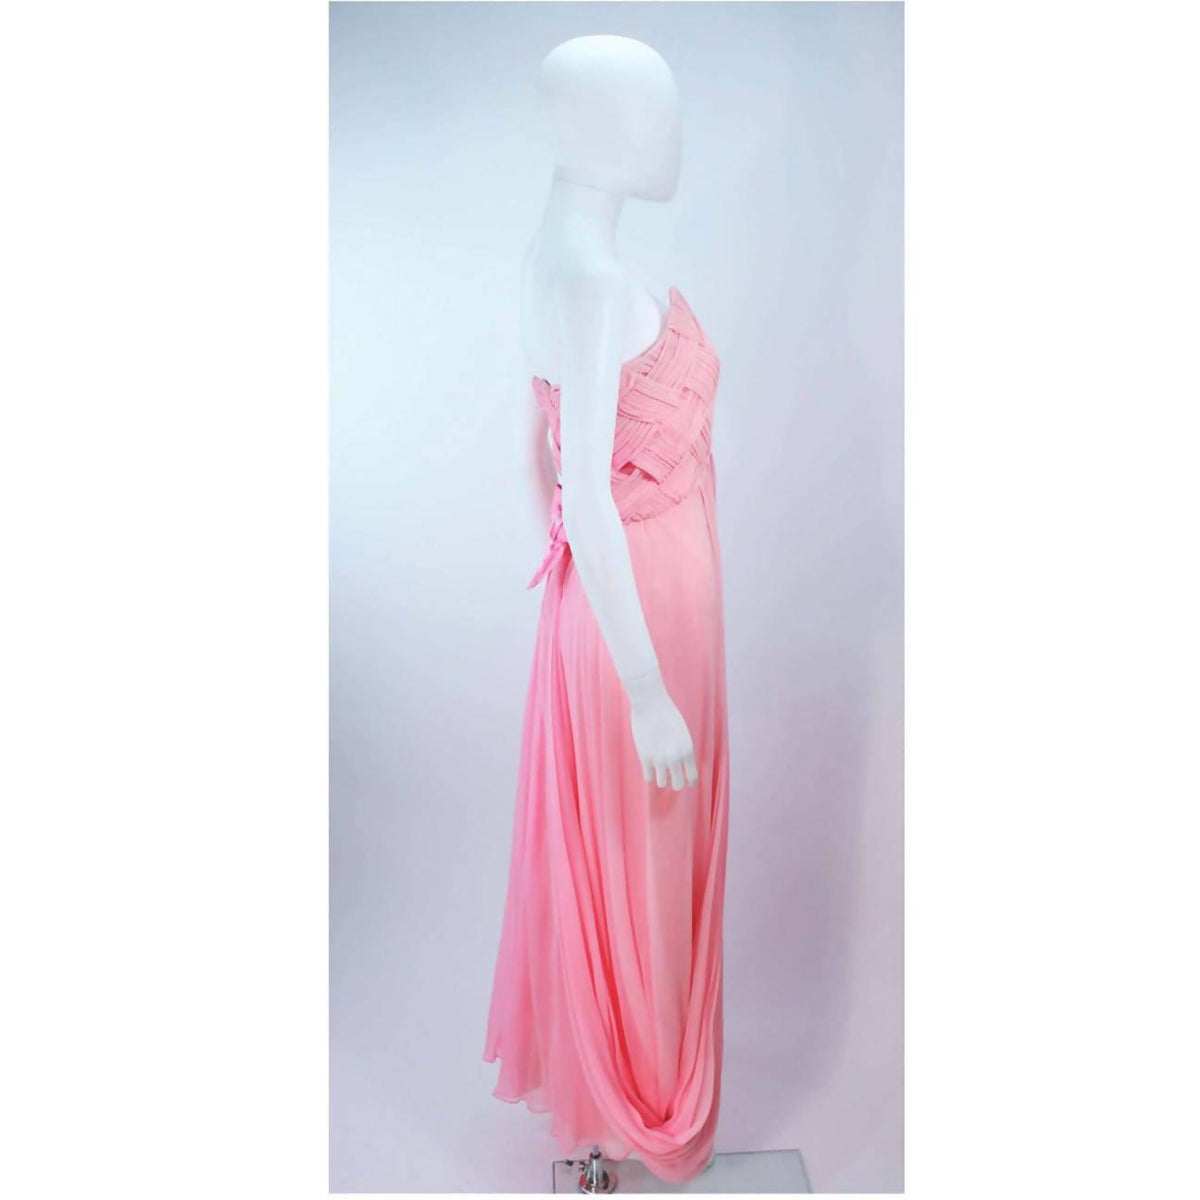 Pre-Owned ARNOLD SCAASI Pink Draped Chiffon Gown | Size 4/6 - theREMODA